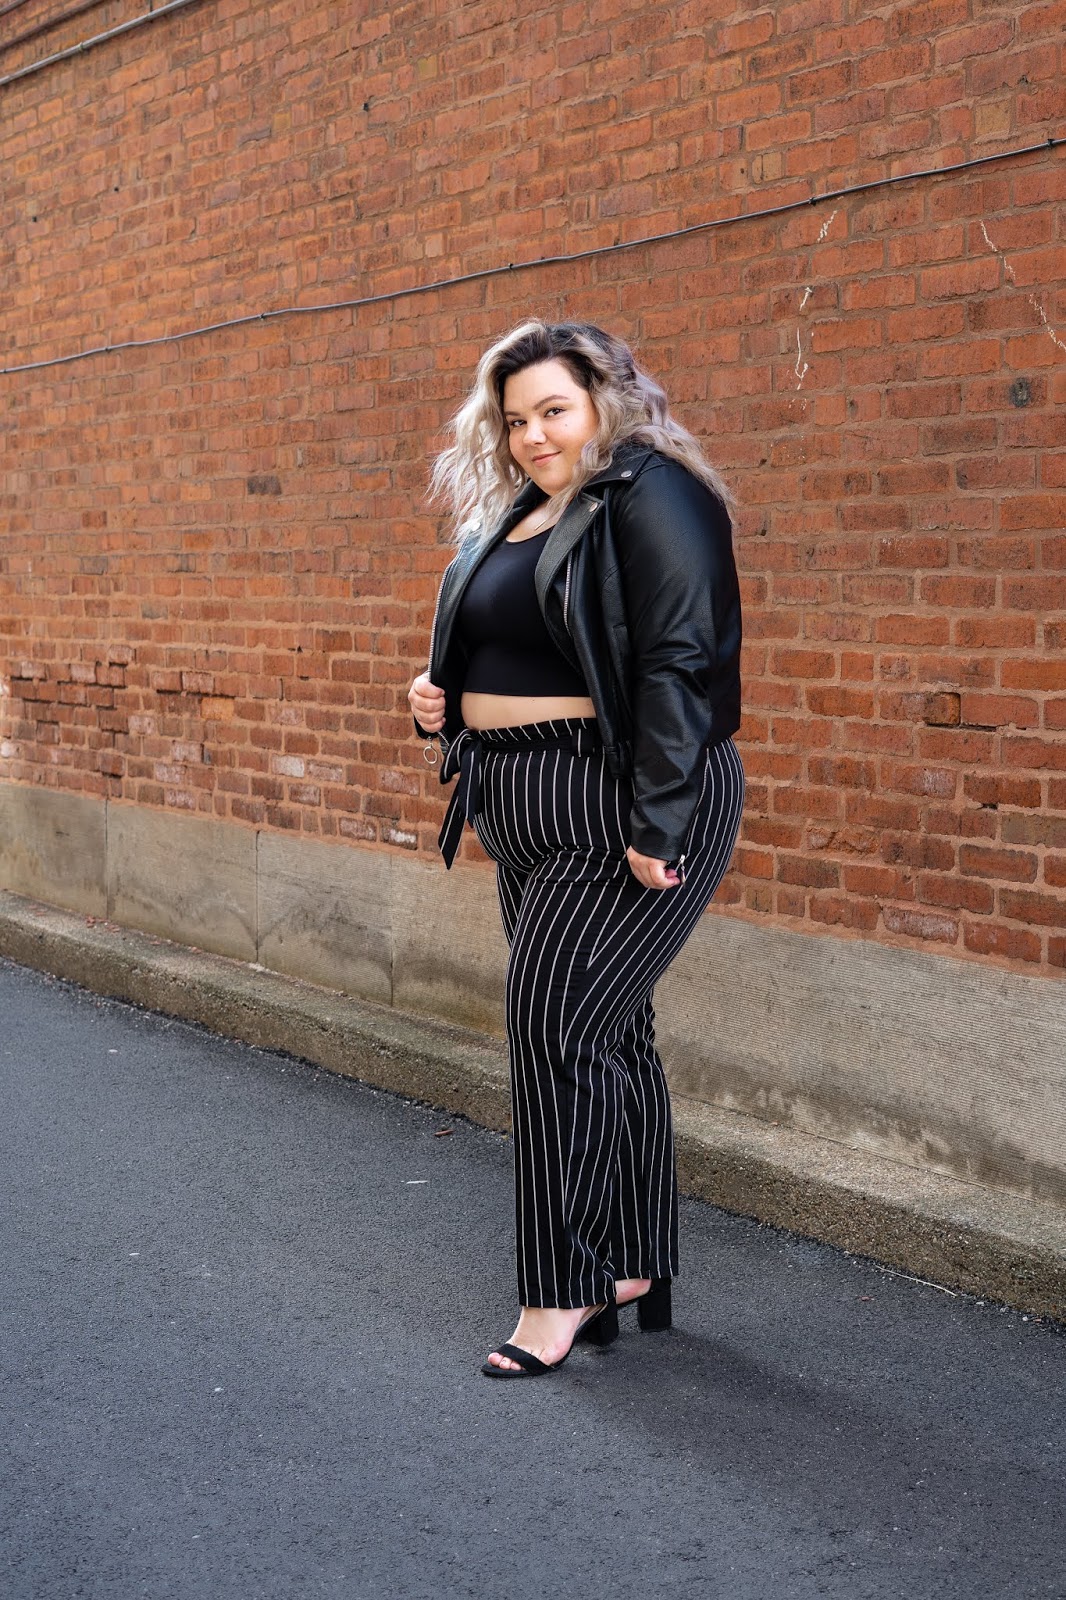 Chicago Plus Size Petite Fashion Blogger, YouTuber, and model Natalie Craig, of Natalie in the City, reviews Fashion Nova's paper bag waist pants and cropped tops.